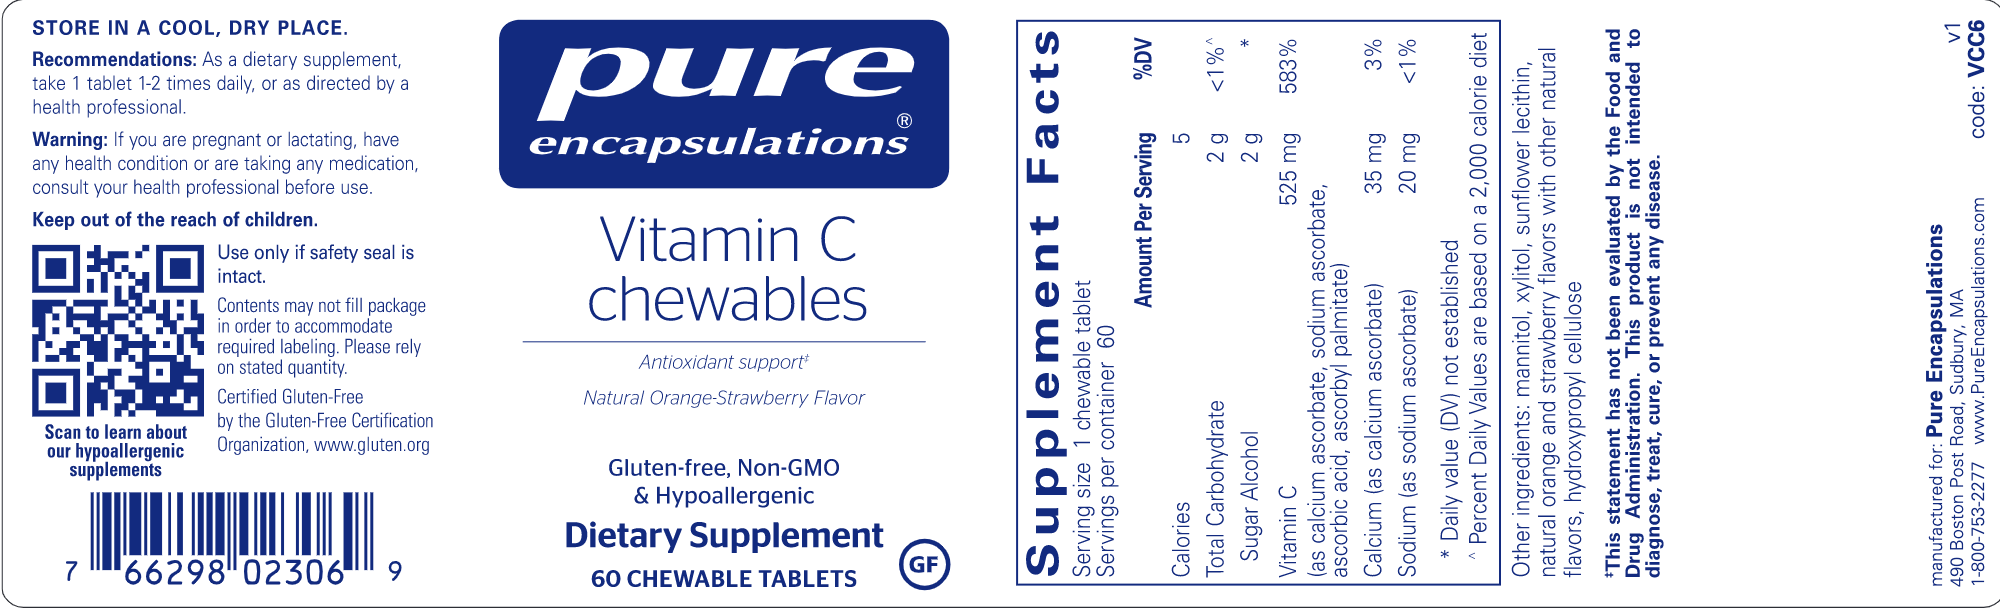 Vitamin C Chewables (60 Chewable Tablets)-Vitamins & Supplements-Pure Encapsulations-Pine Street Clinic